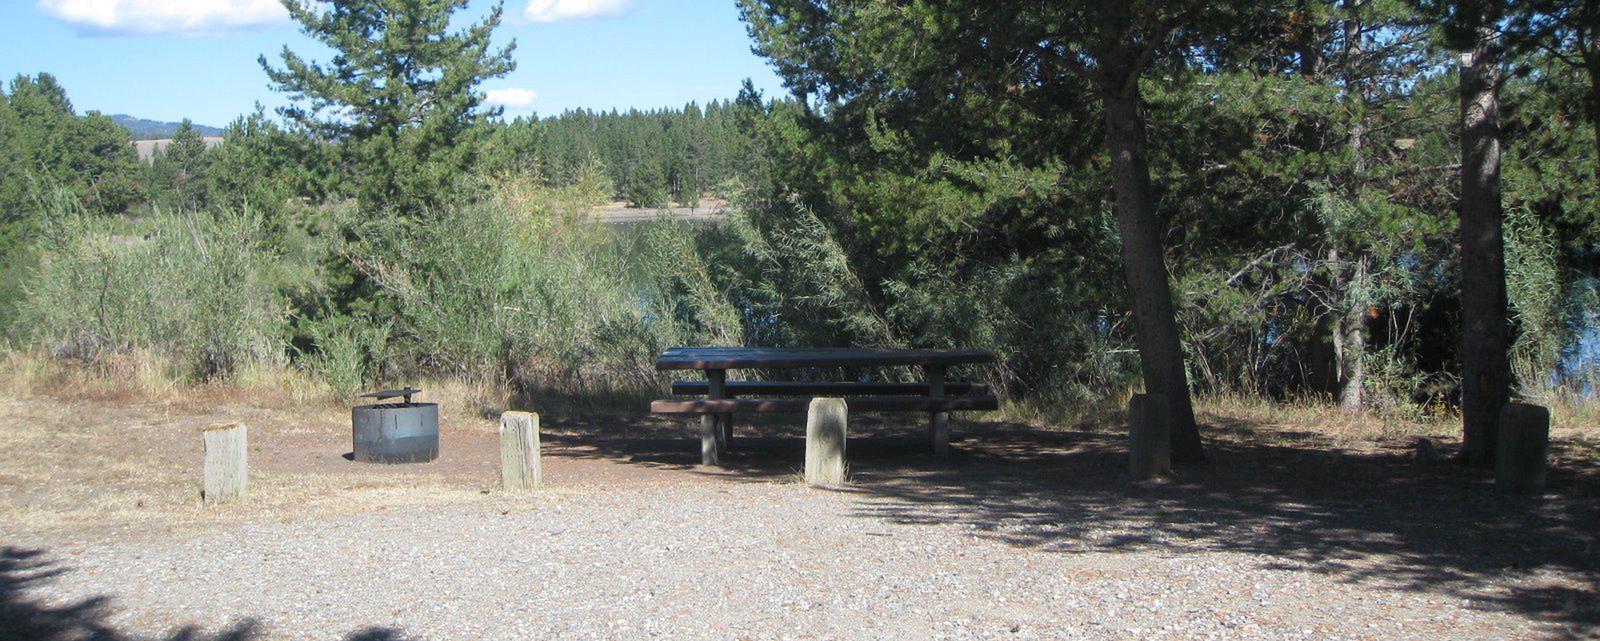 Site 6, campsite surrounded by pine trees, picnic table & fire ringSite 6